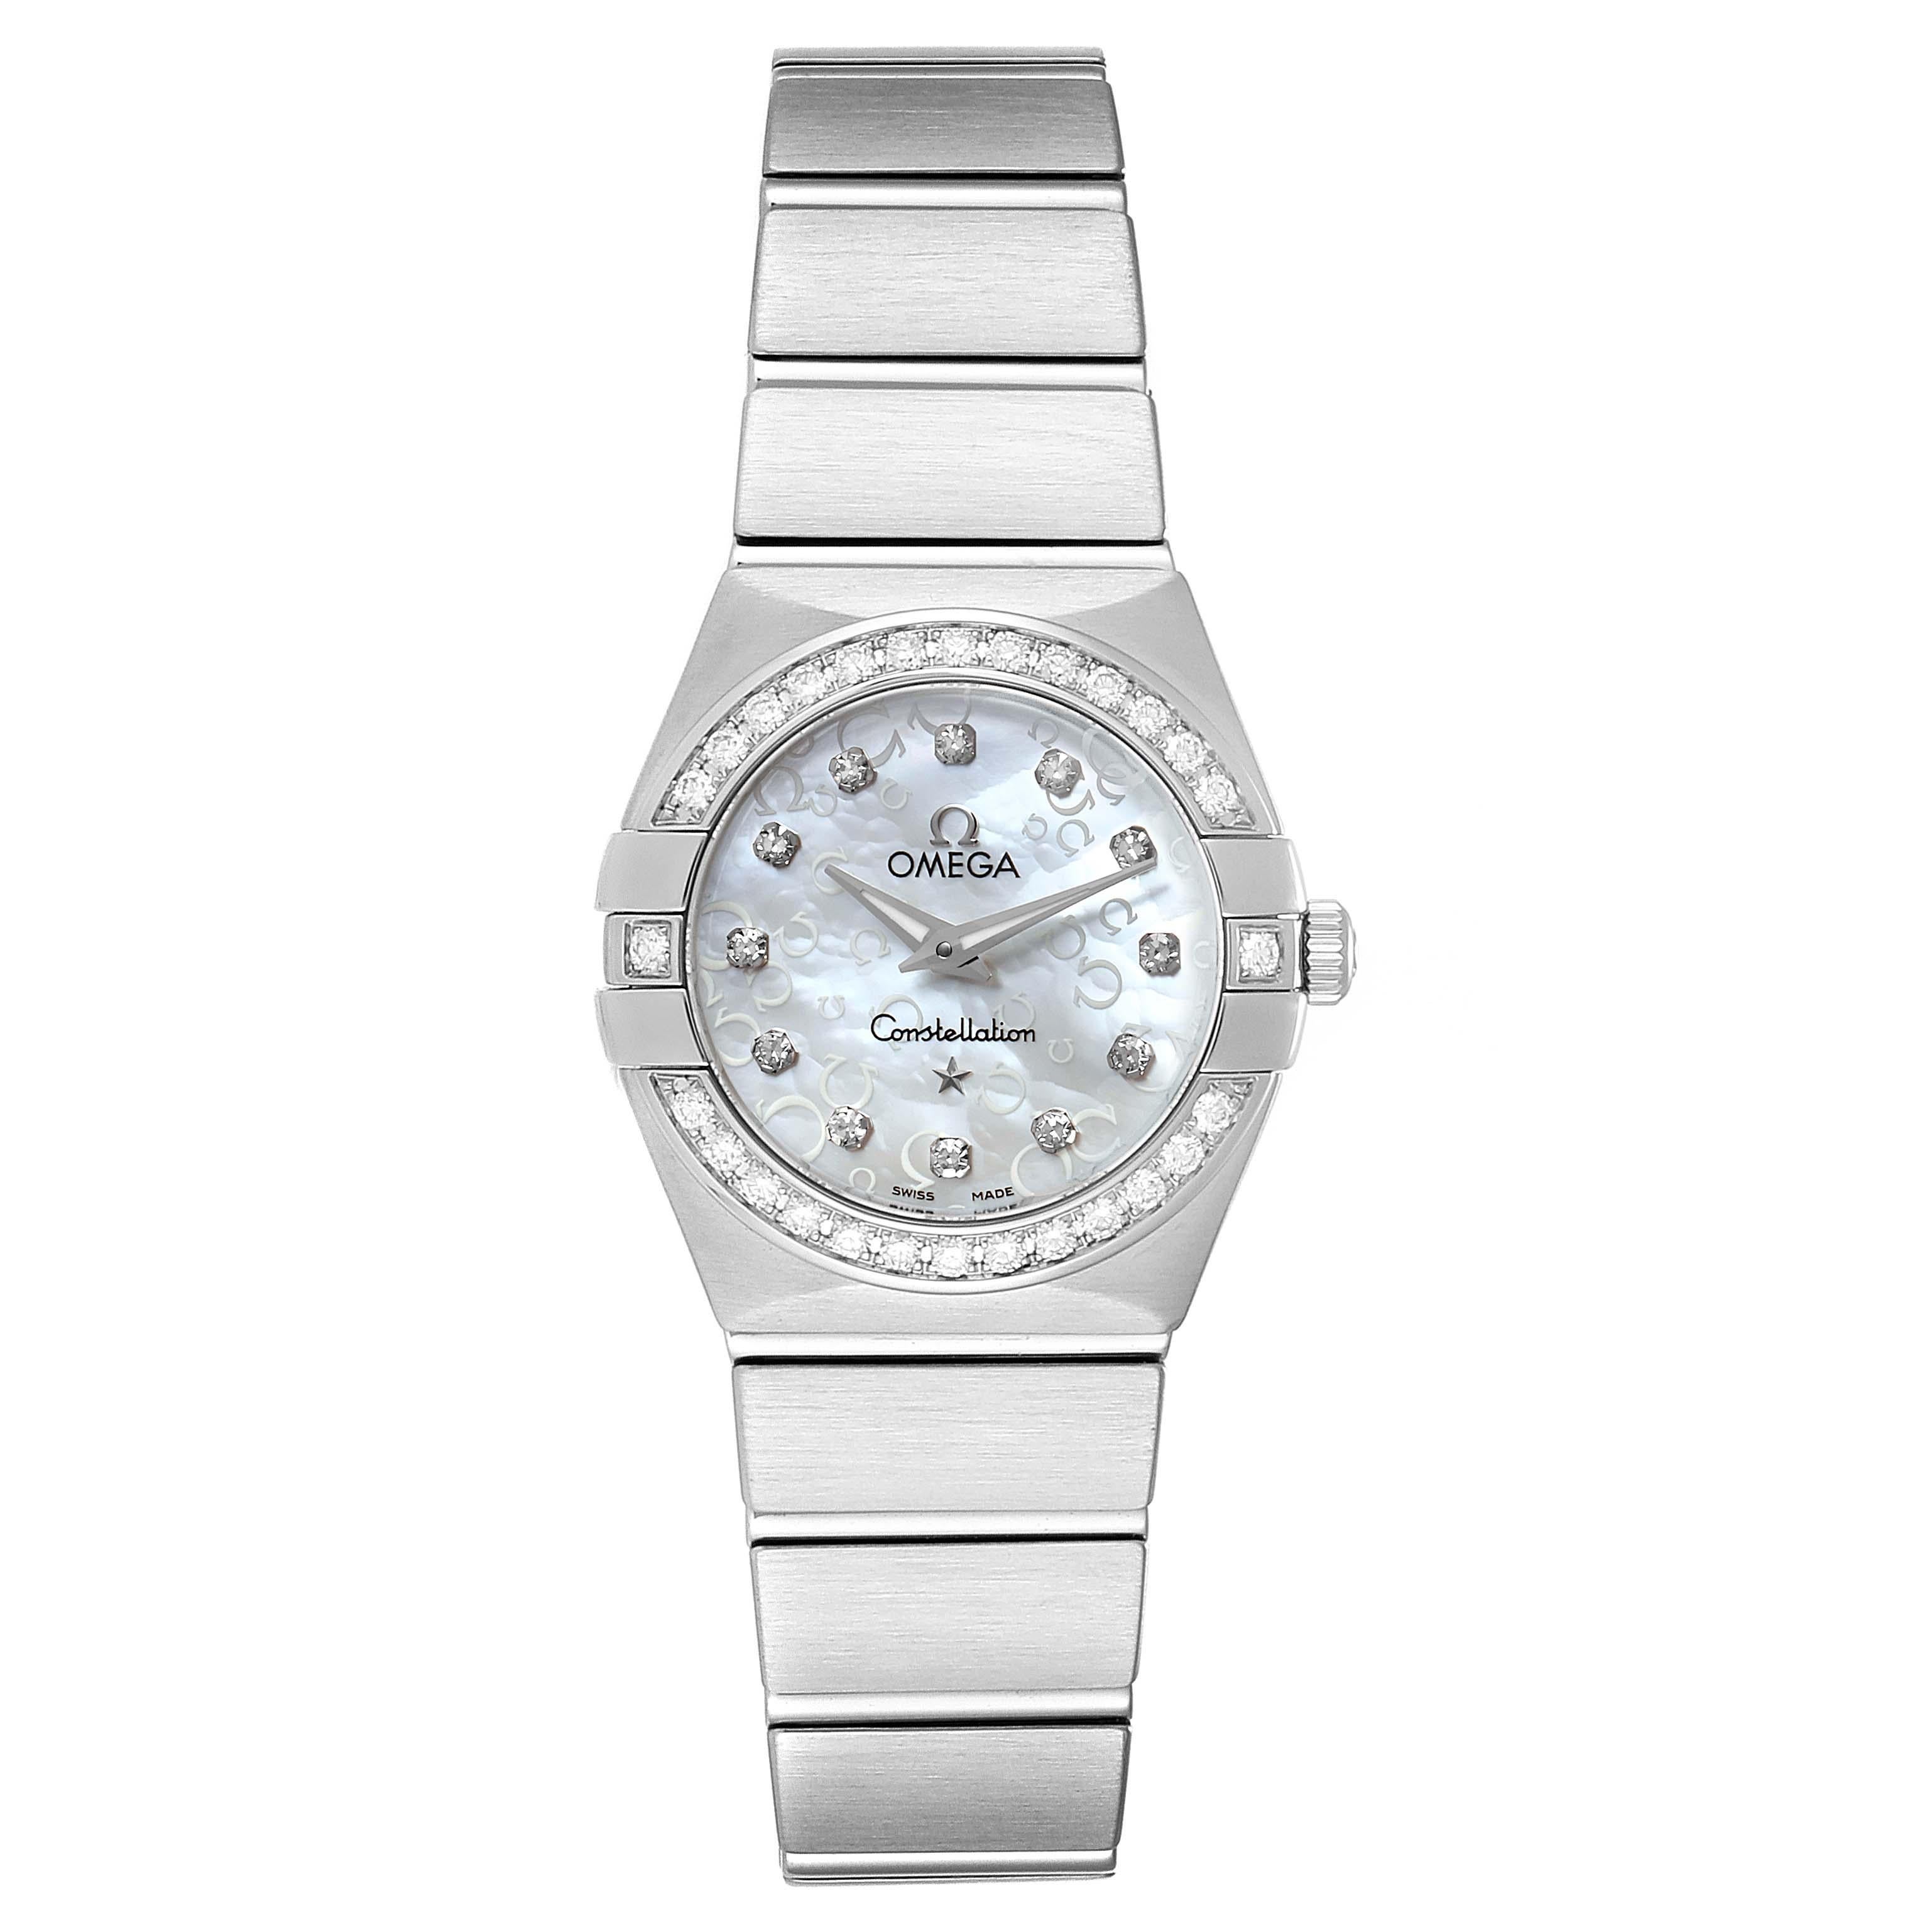 Omega Constellation 27mm Diamond Ladies Watch 123.15.24.60.52.001. Quartz movement. Stainless steel brushed round case 24mm in diameter. Stainless steel diamond bezel. Scratch resistant sapphire crystal. Silver dial with Omega logo and diamond hour